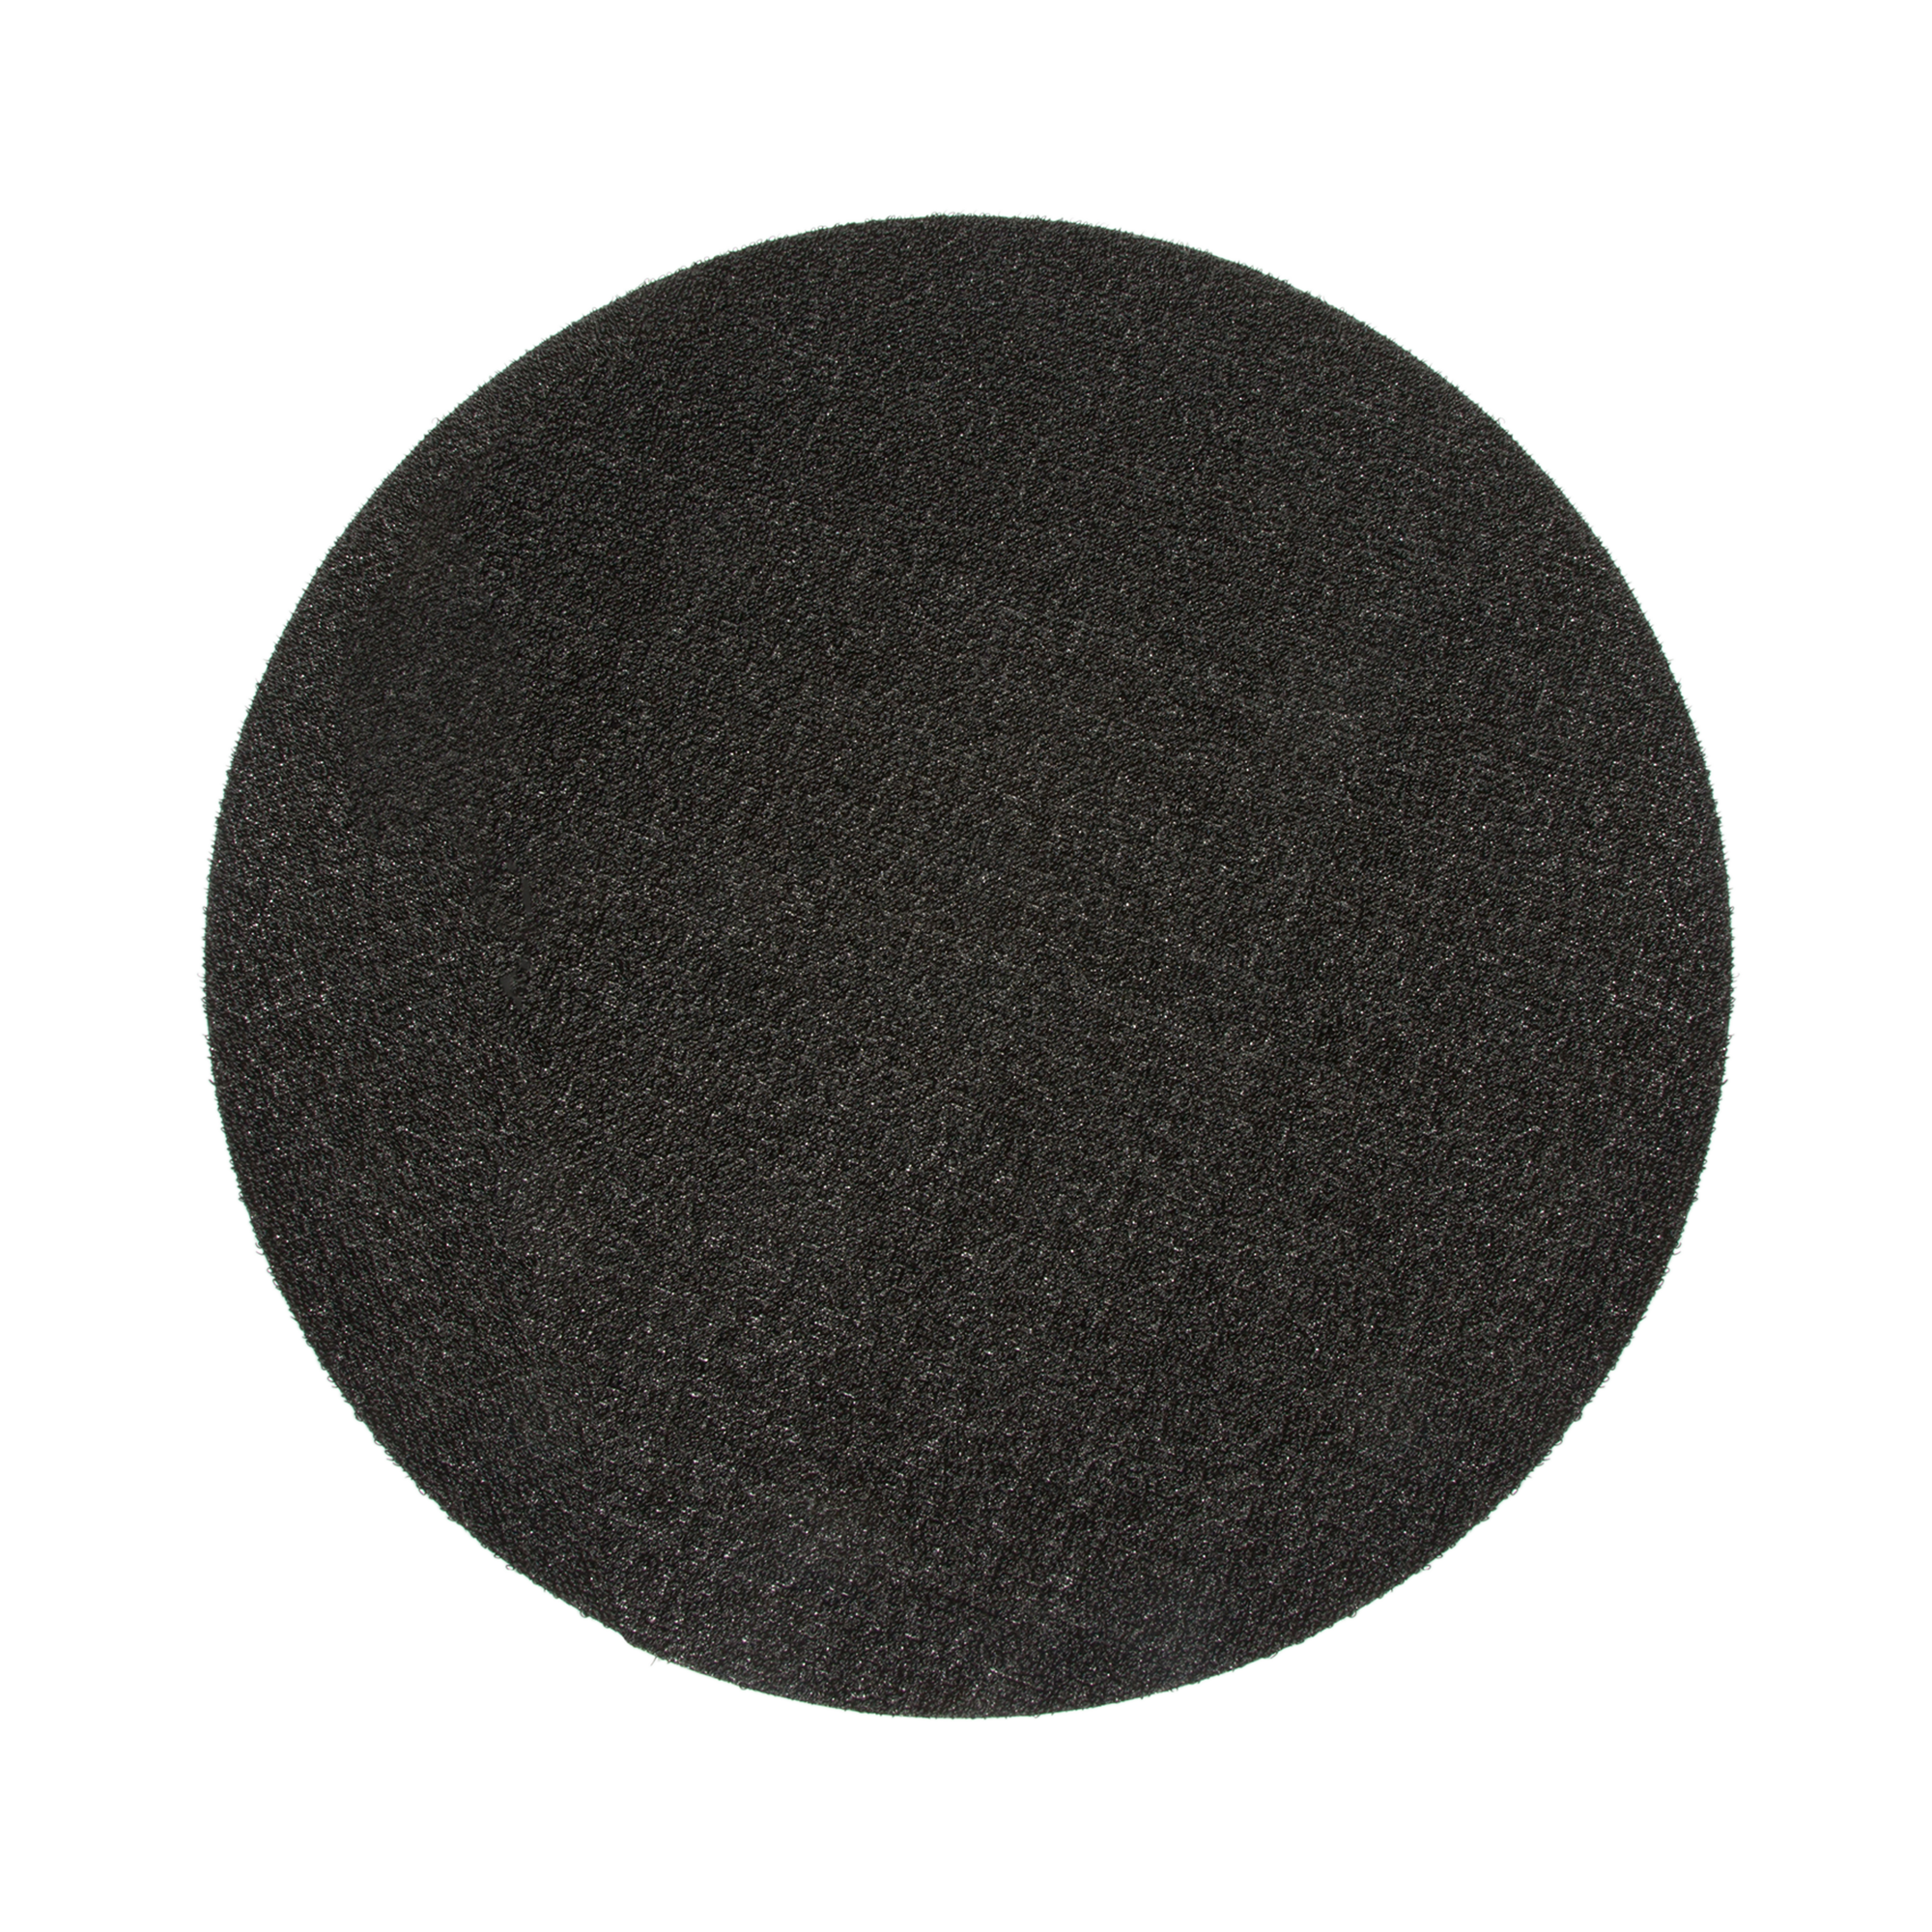 A versatile indoor/outdoor design, this circular shag mat will fit seamlessly into a wide variety of décor styles and is ideal for bathrooms, entryways, kitchens, and outdoor spac